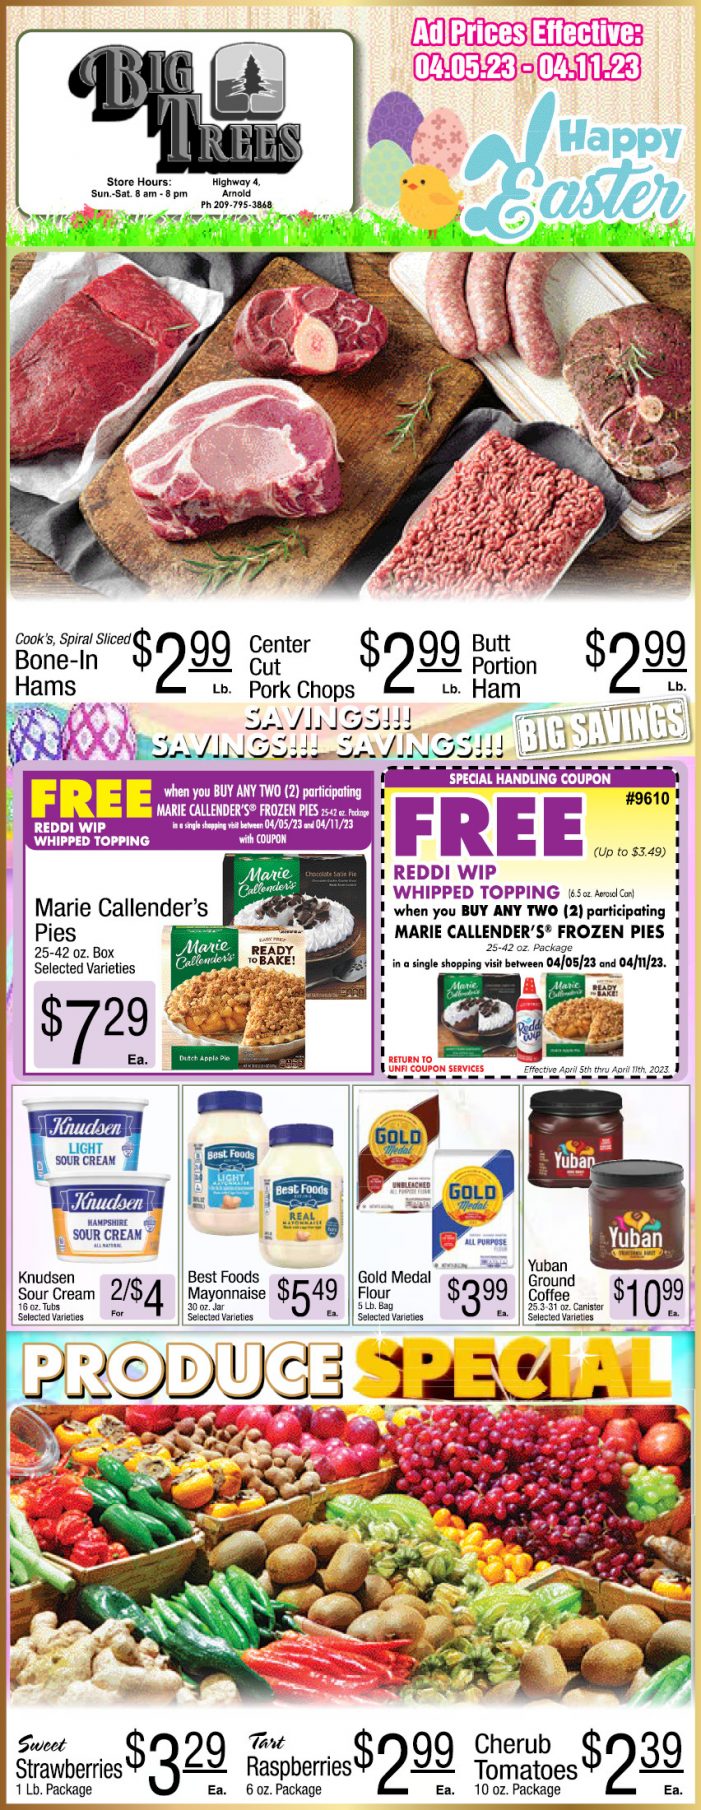 Big Trees Market Weekly Ad, Grocery, Produce, Meat & Deli Specials Through April 11th